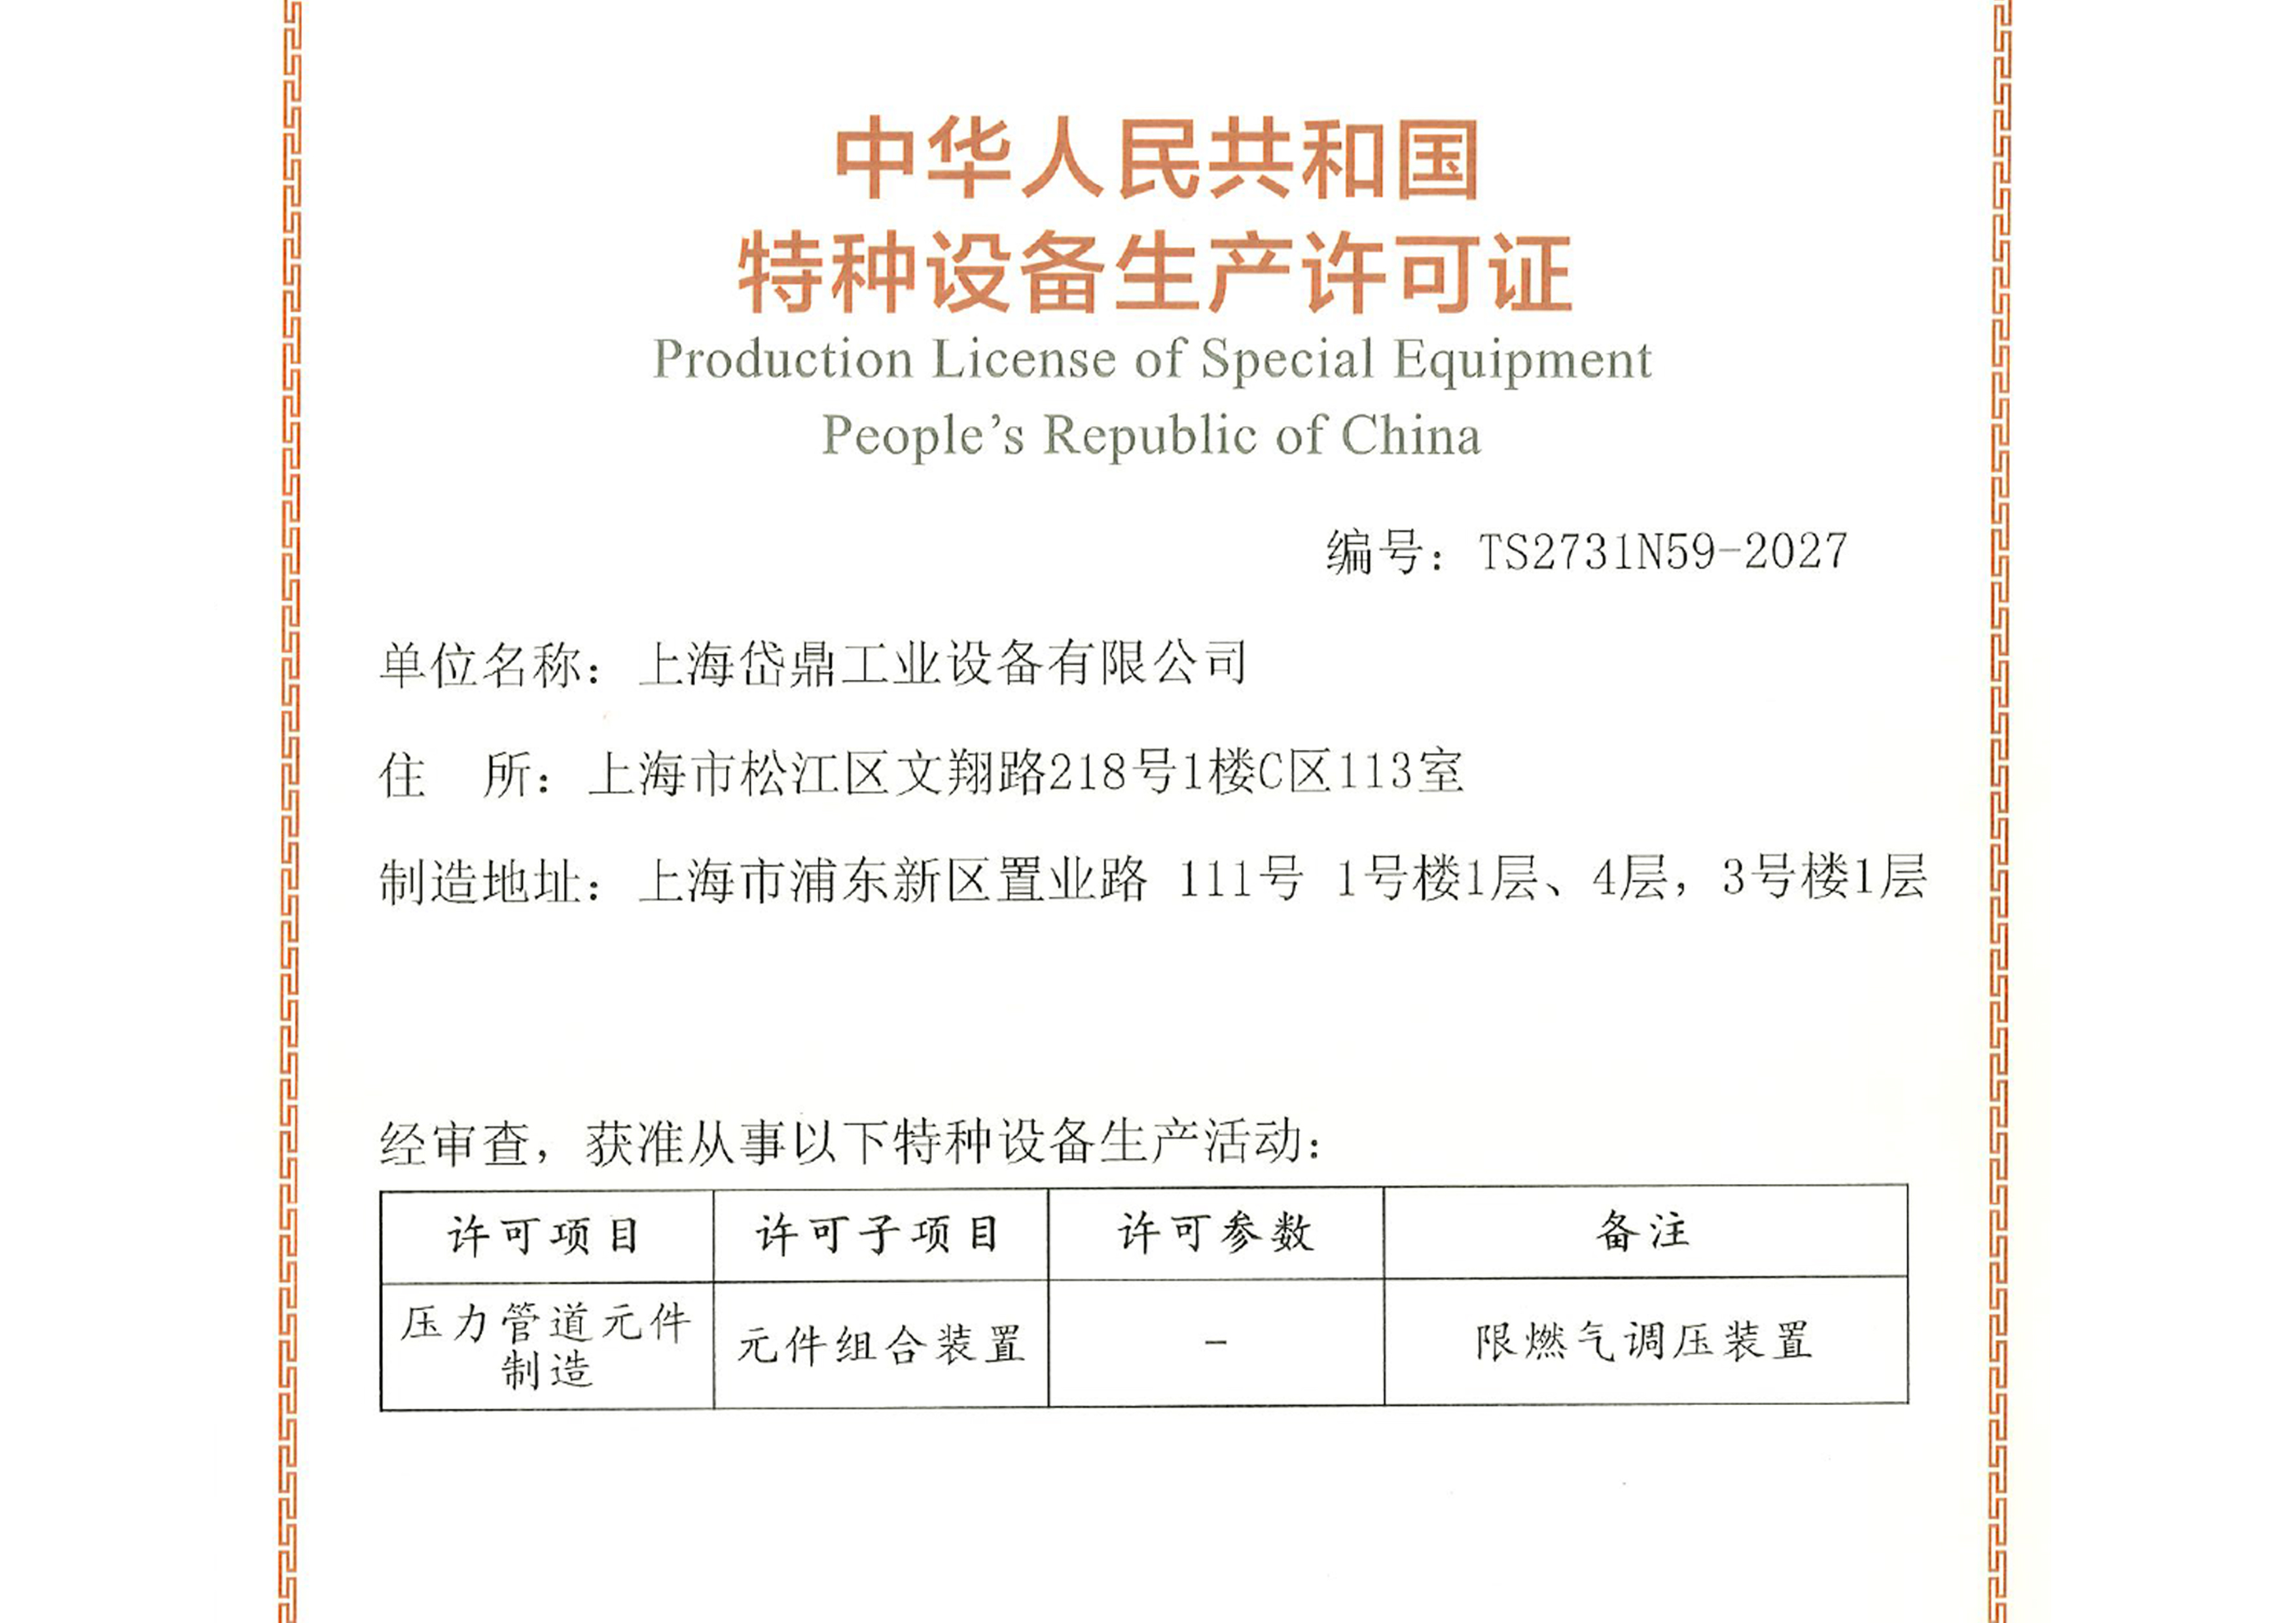 Obtained the special equipment production license issued by People's Republic of China (PRC).